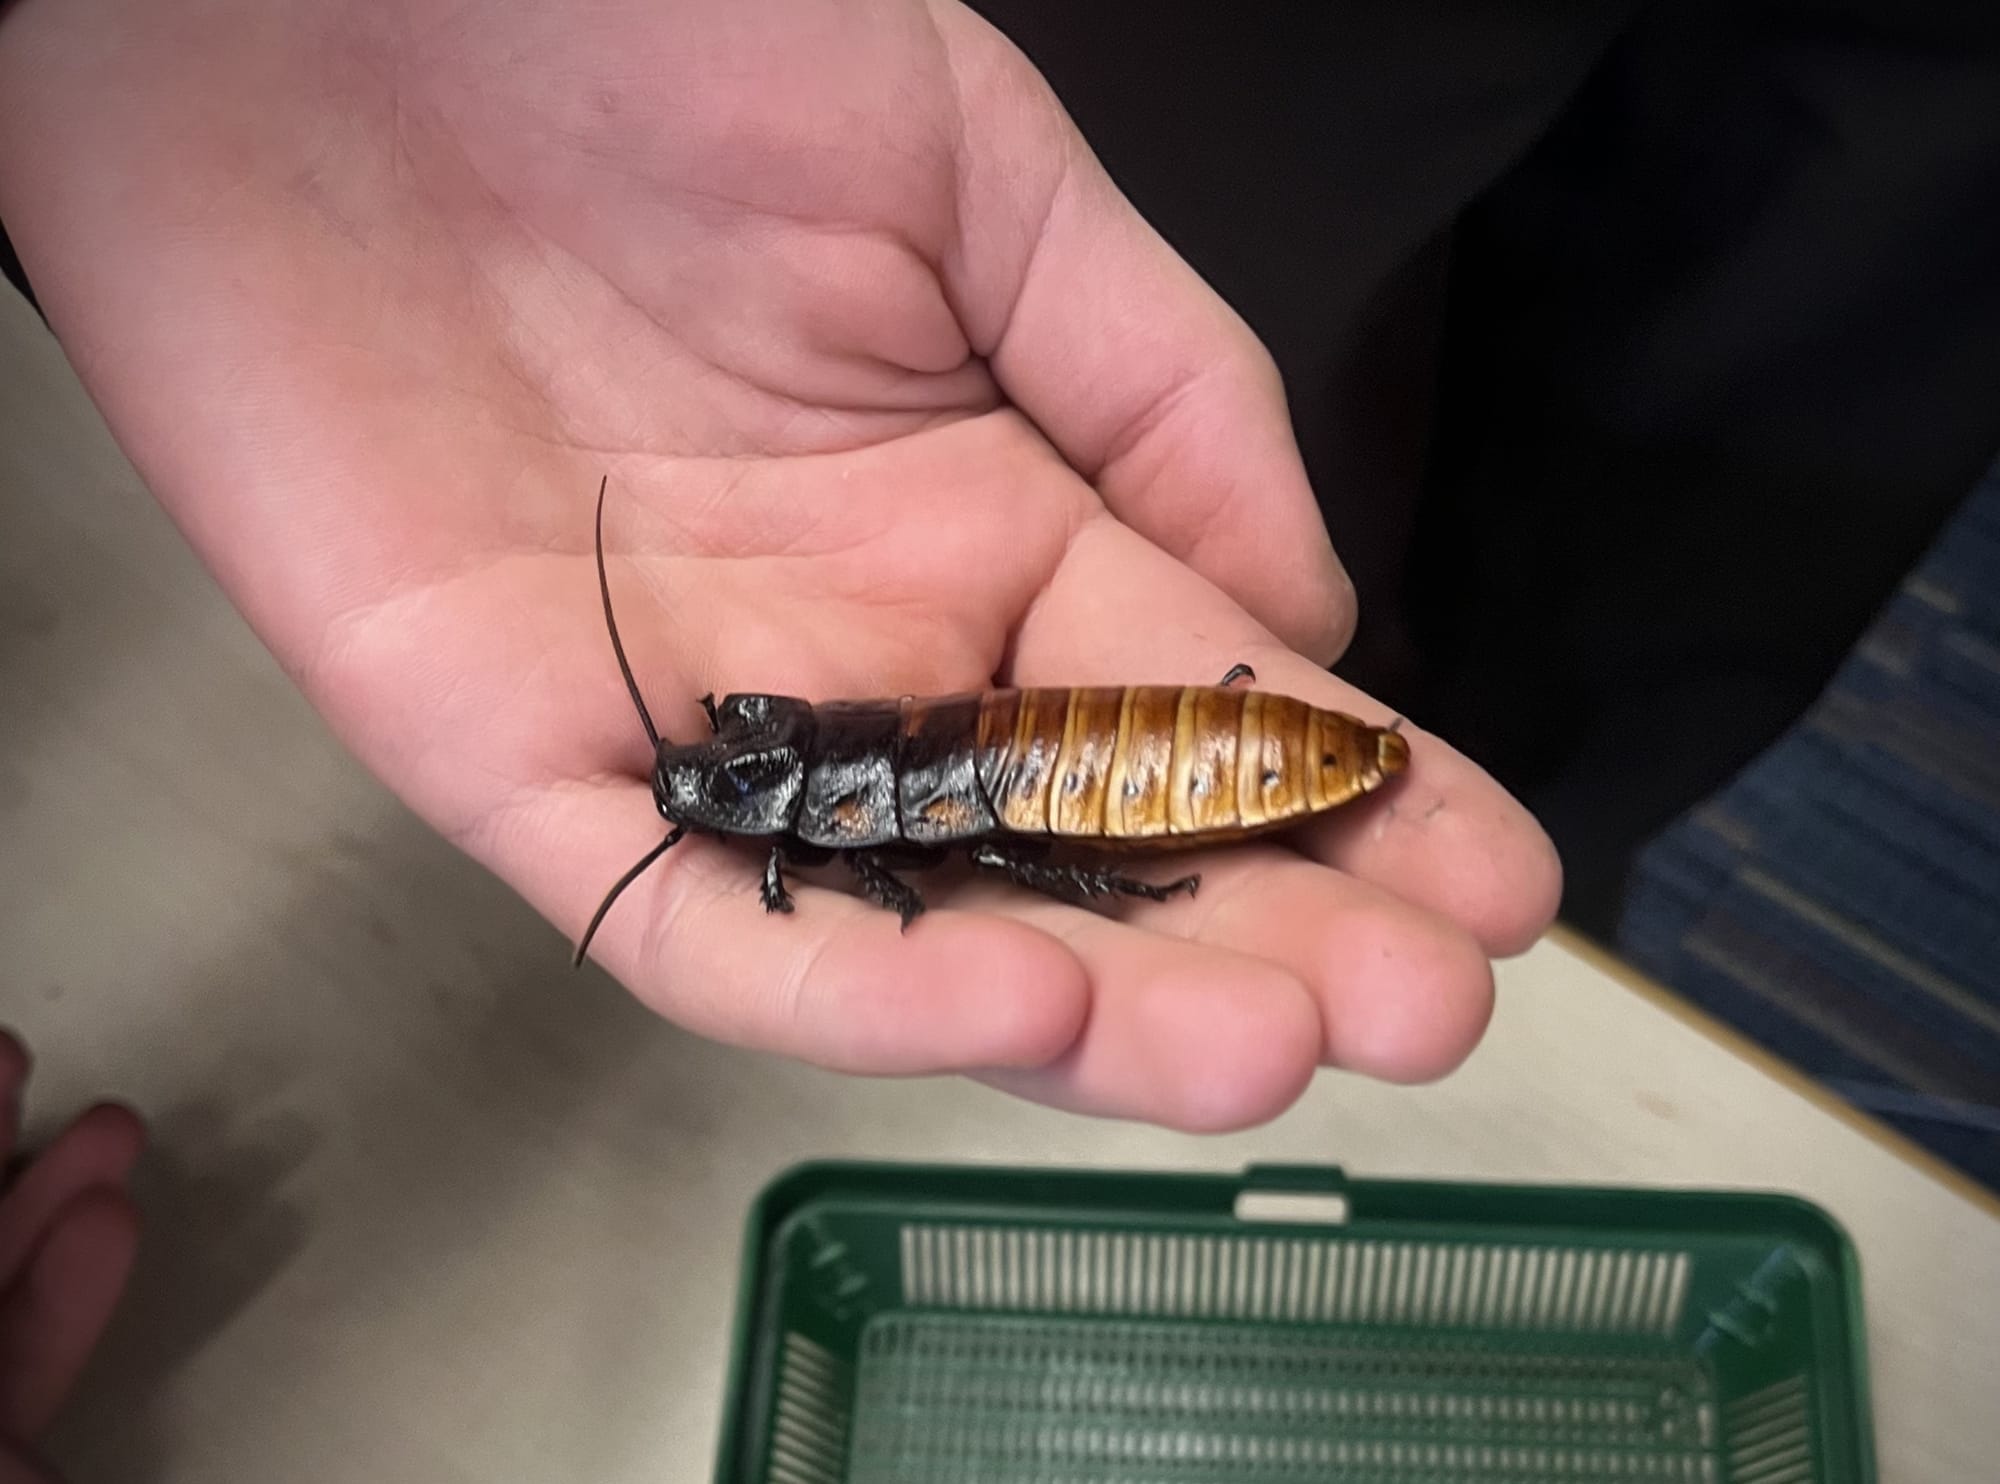 Mr. Olsen’s New Pet Cockroach Takes Up Residence at MSMHS